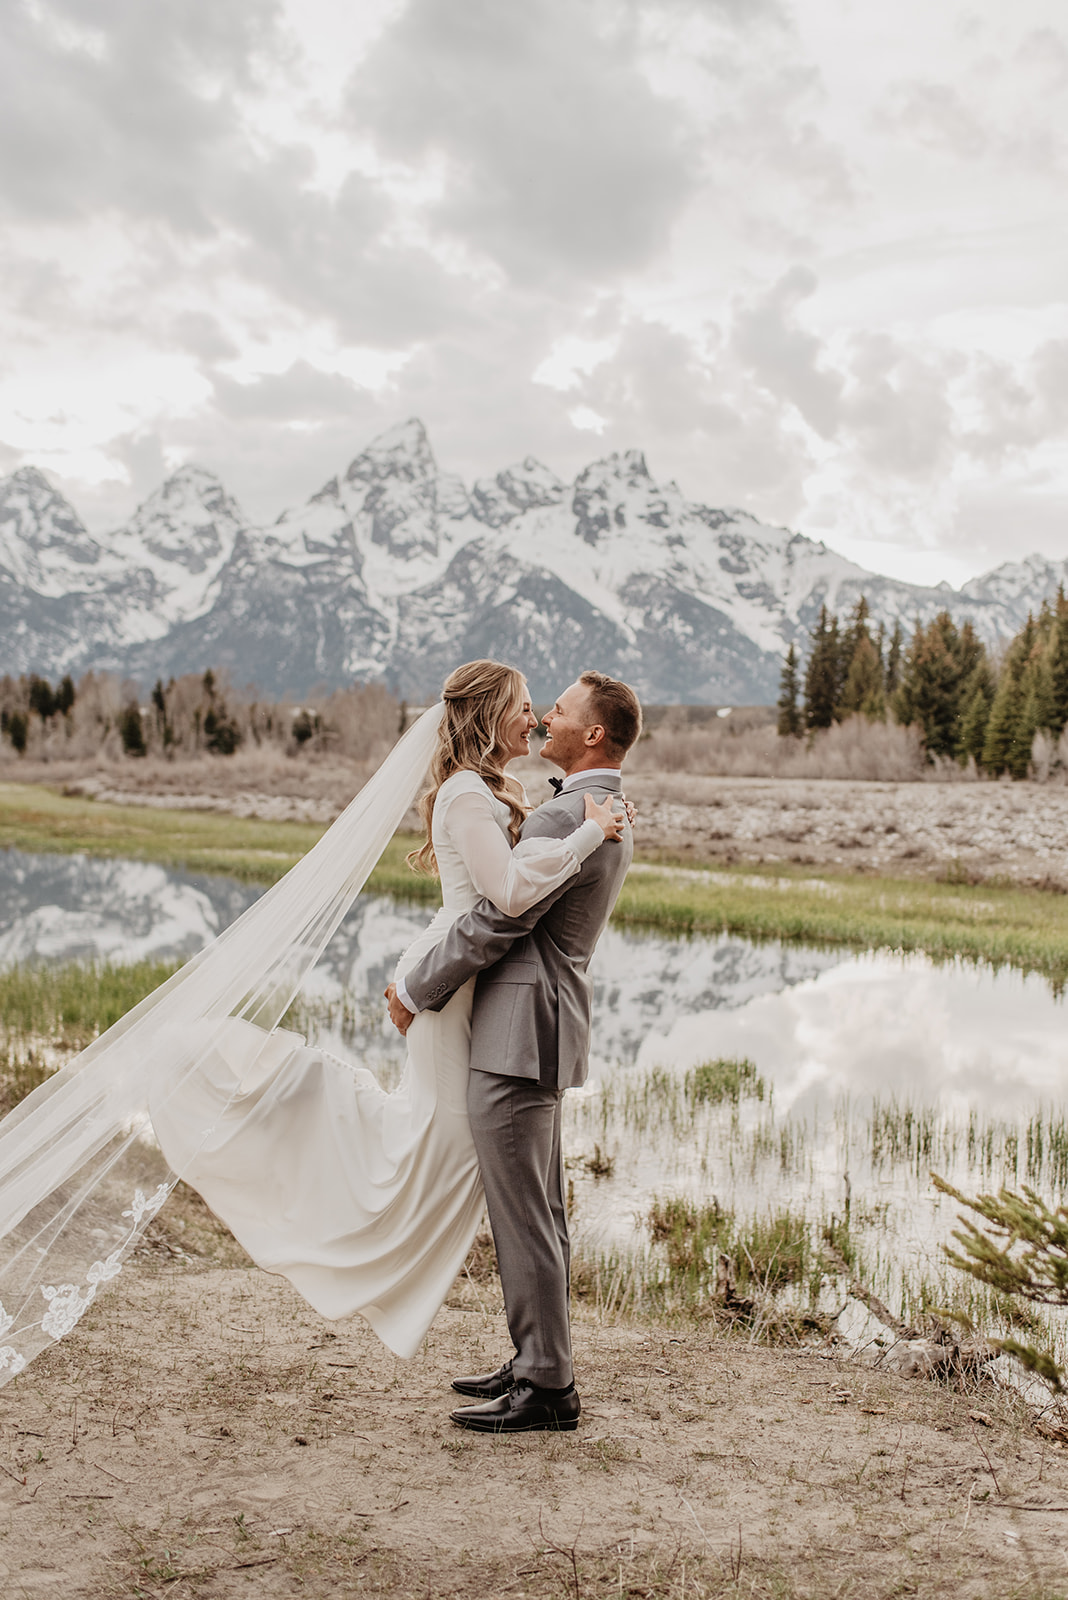 Man lifes up bride from her legs as she smiles and her wedding veil flows behind her in front of the Tetons for their Jackson Hole wedding